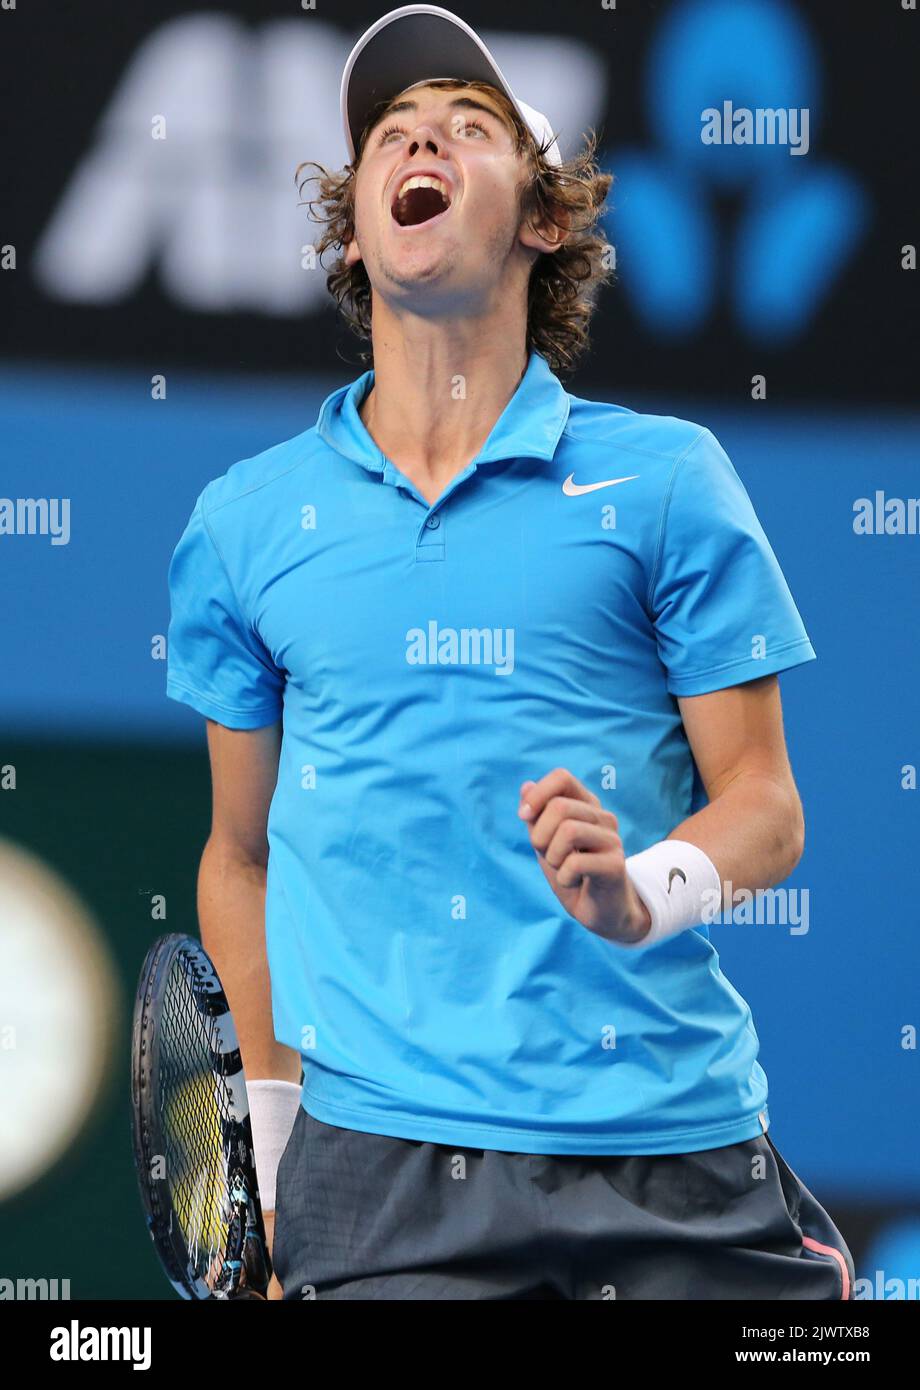 Jordan Thompson (Australia) reacts after losing a point against Jerzy  Janowicz (Poland) on day one of the Australian Open tennis tournament in  Melbourne on Monday, Jan. 13, 2014. (AAP Image/Dave Crosling) NO